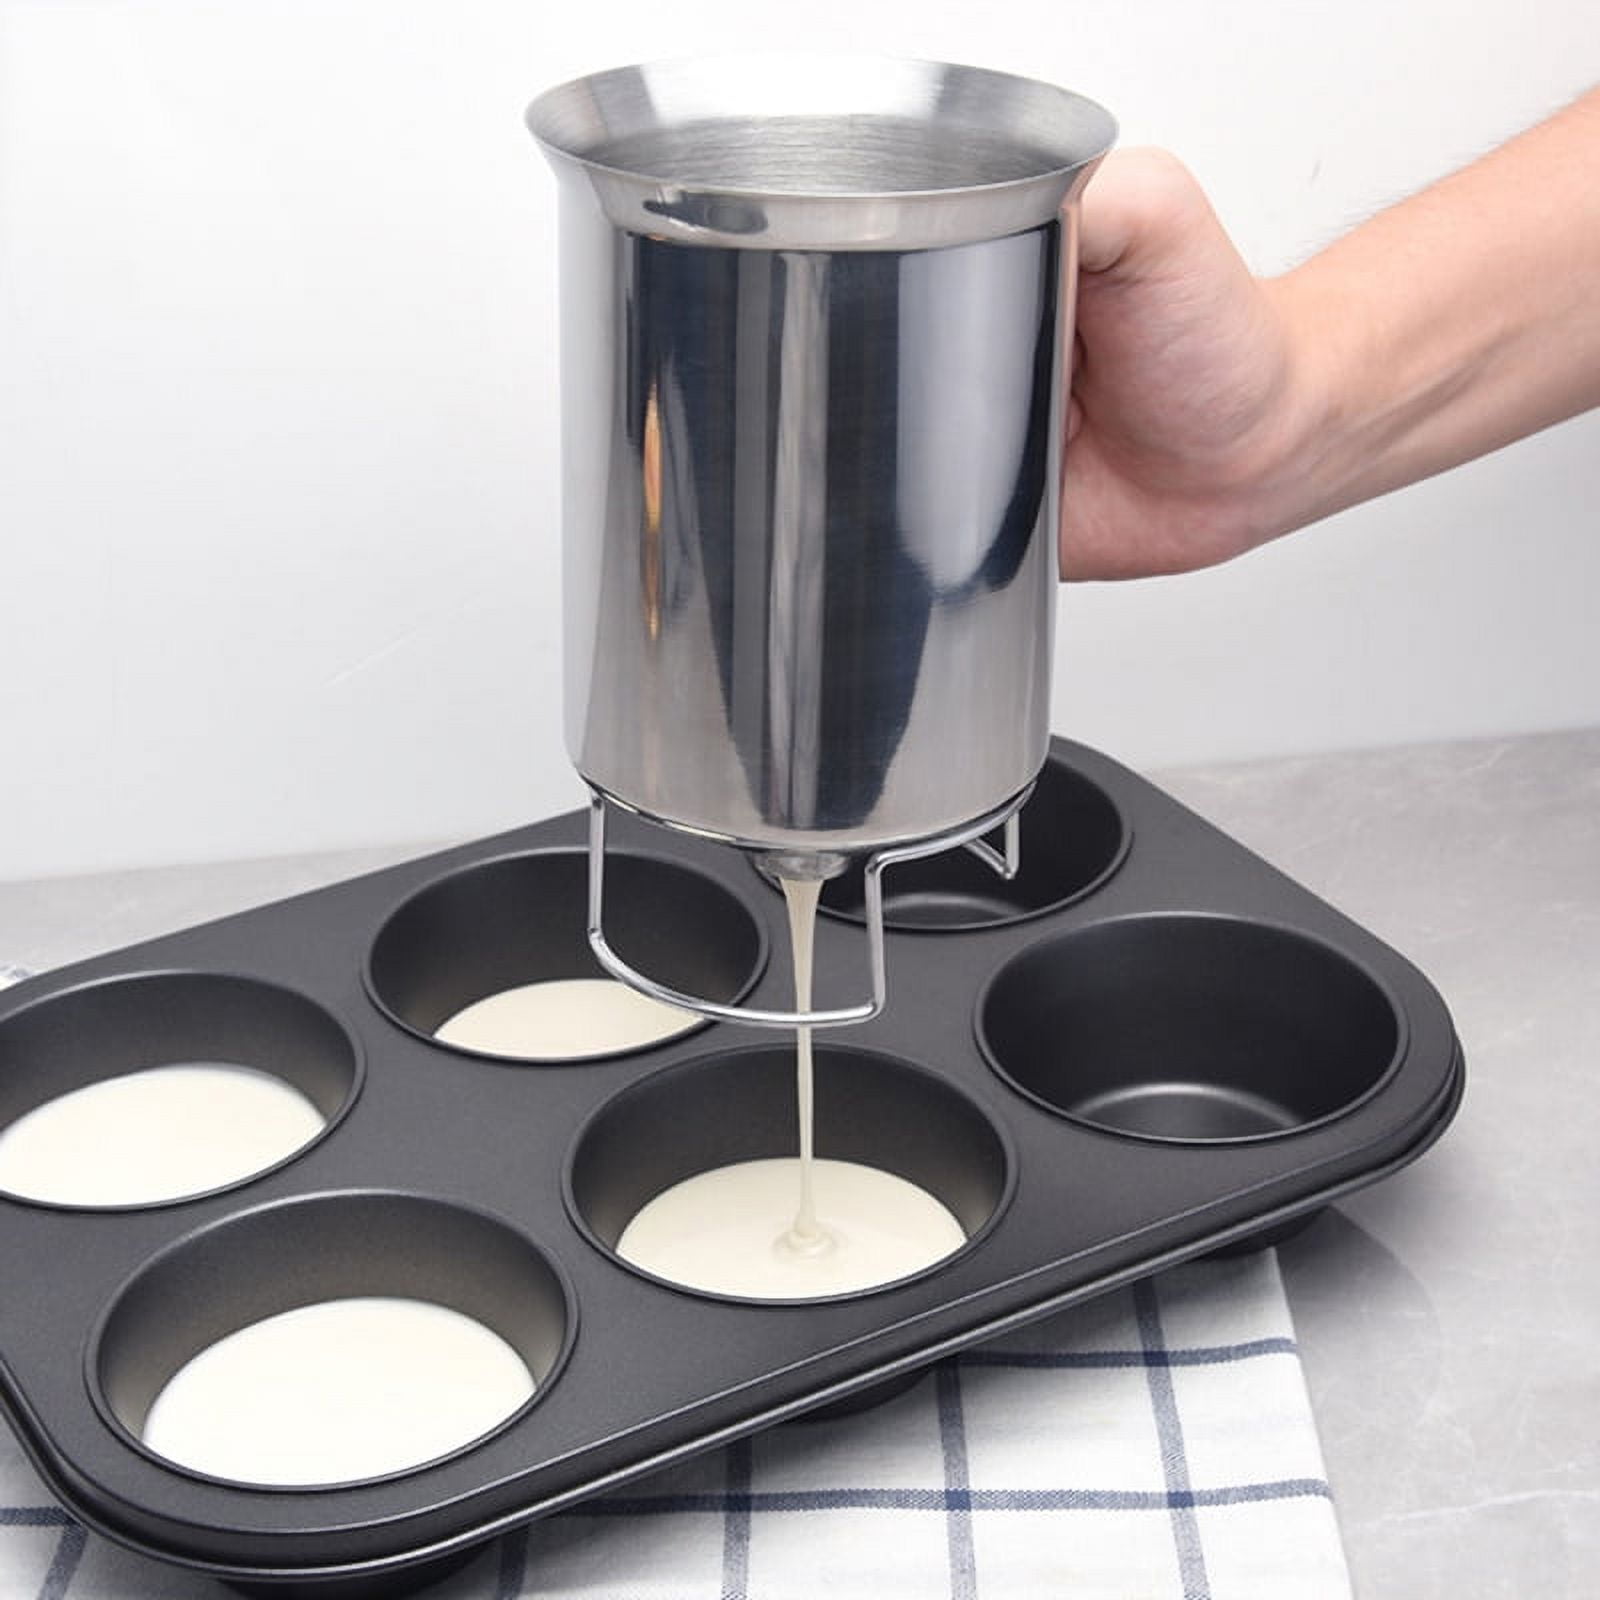 Dropship Pancake Batter Dispenser Mixer Stainless Steel Funnel Design With  Stand Rack 1000 ML Waffle Batter Dispenser Pancake Maker Cooking Baking  Tools to Sell Online at a Lower Price